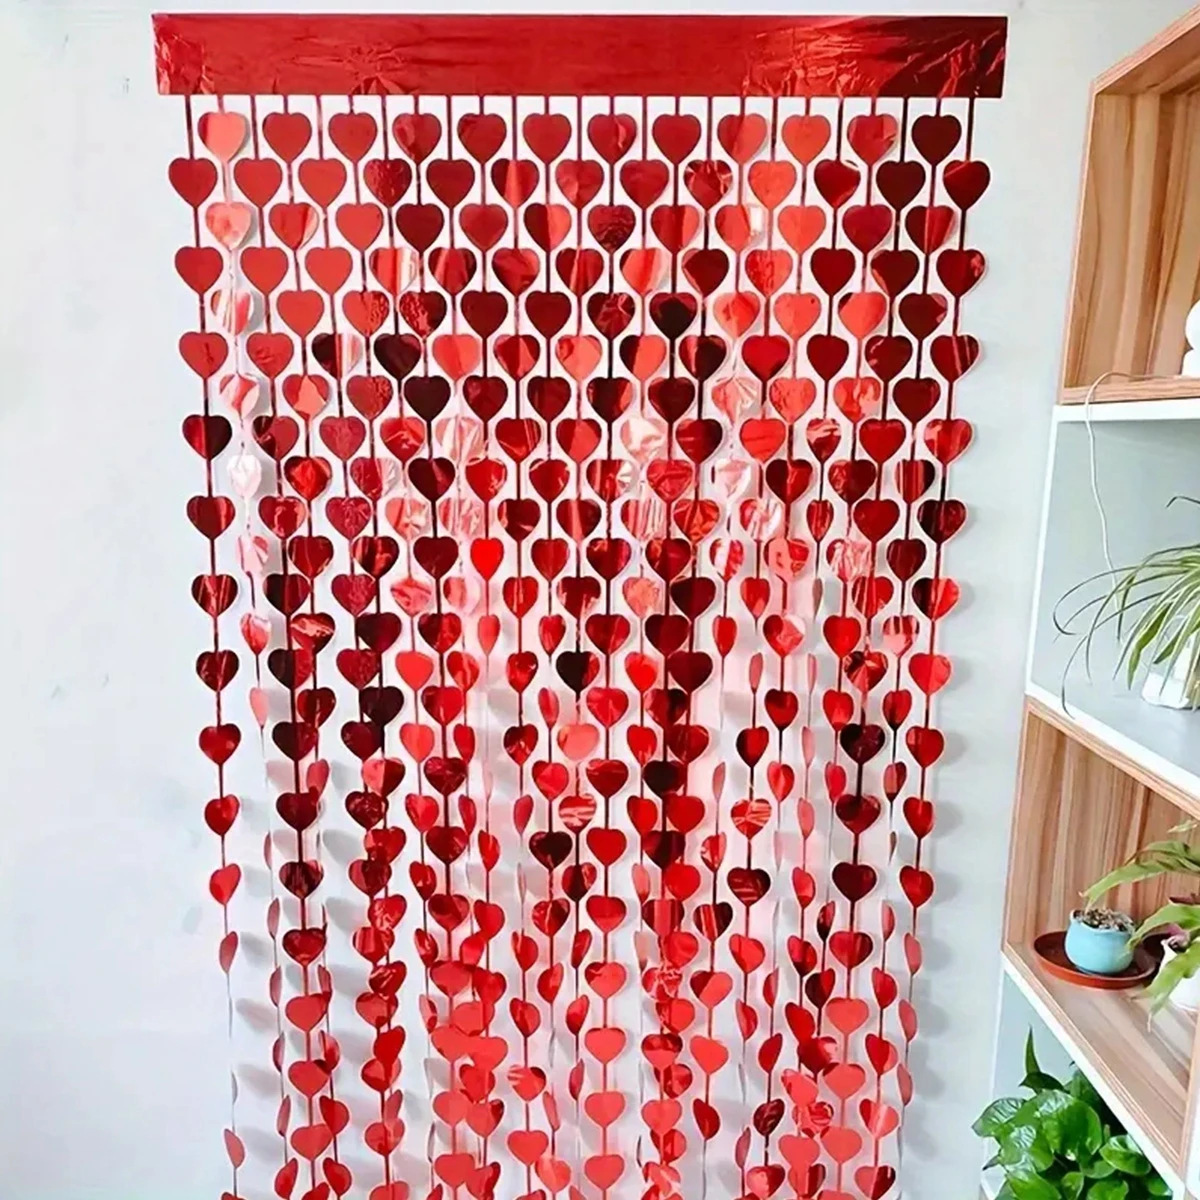 2M Red Heart Rain Curtain Shiny Foil Love Tassels Curtain Wedding Birthday Party Background Hanging Garland Home Room Decor